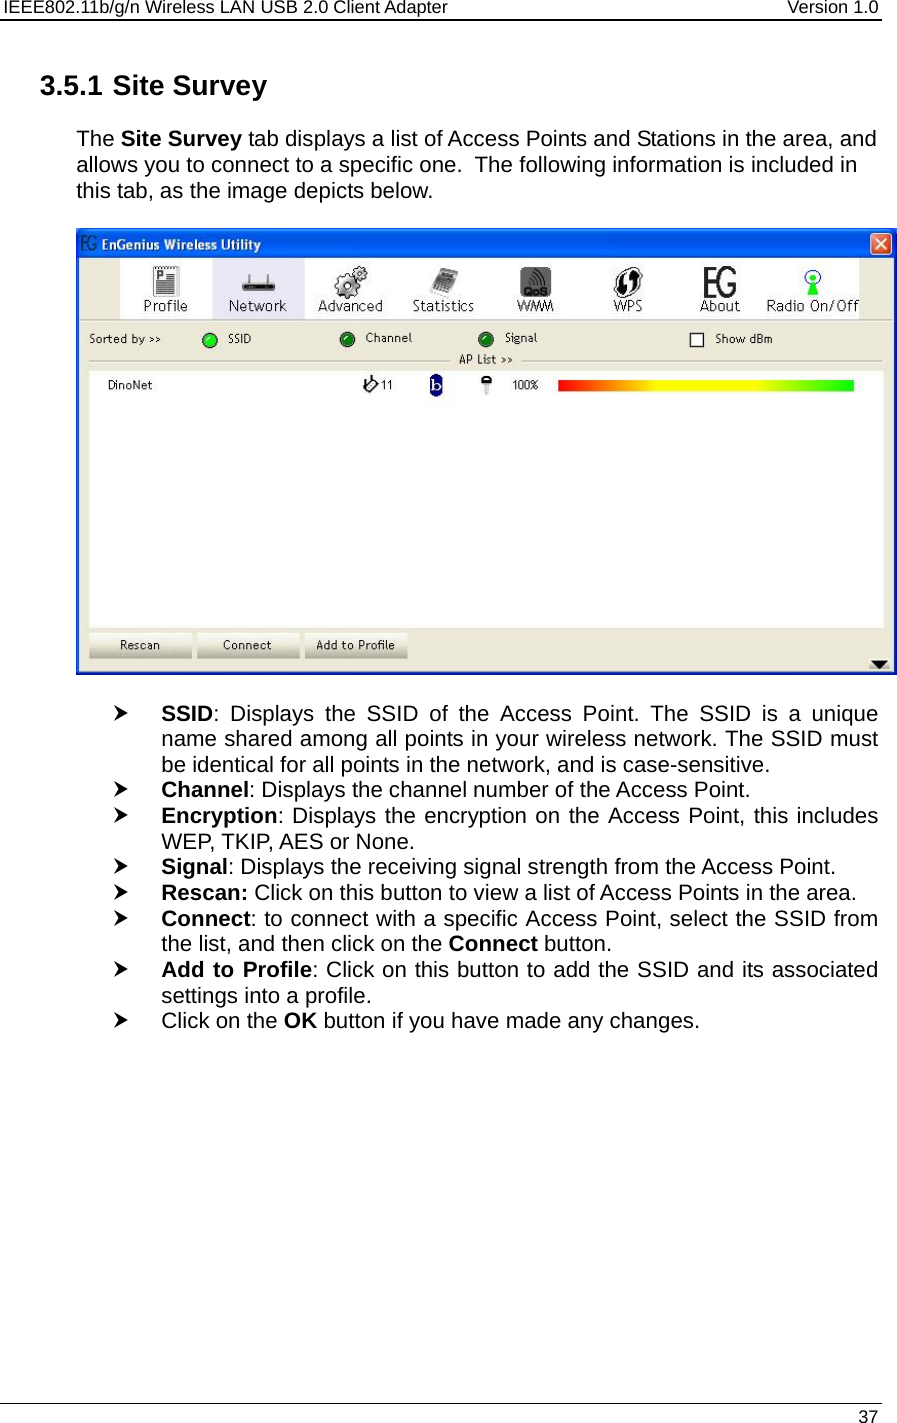 IEEE802.11b/g/n Wireless LAN USB 2.0 Client Adapter  Version 1.0   37  3.5.1 Site Survey The Site Survey tab displays a list of Access Points and Stations in the area, and allows you to connect to a specific one.  The following information is included in this tab, as the image depicts below.    h SSID: Displays the SSID of the Access Point. The SSID is a unique name shared among all points in your wireless network. The SSID must be identical for all points in the network, and is case-sensitive. h Channel: Displays the channel number of the Access Point. h Encryption: Displays the encryption on the Access Point, this includes WEP, TKIP, AES or None.  h Signal: Displays the receiving signal strength from the Access Point.  h Rescan: Click on this button to view a list of Access Points in the area. h Connect: to connect with a specific Access Point, select the SSID from the list, and then click on the Connect button. h Add to Profile: Click on this button to add the SSID and its associated settings into a profile.  h Click on the OK button if you have made any changes.  